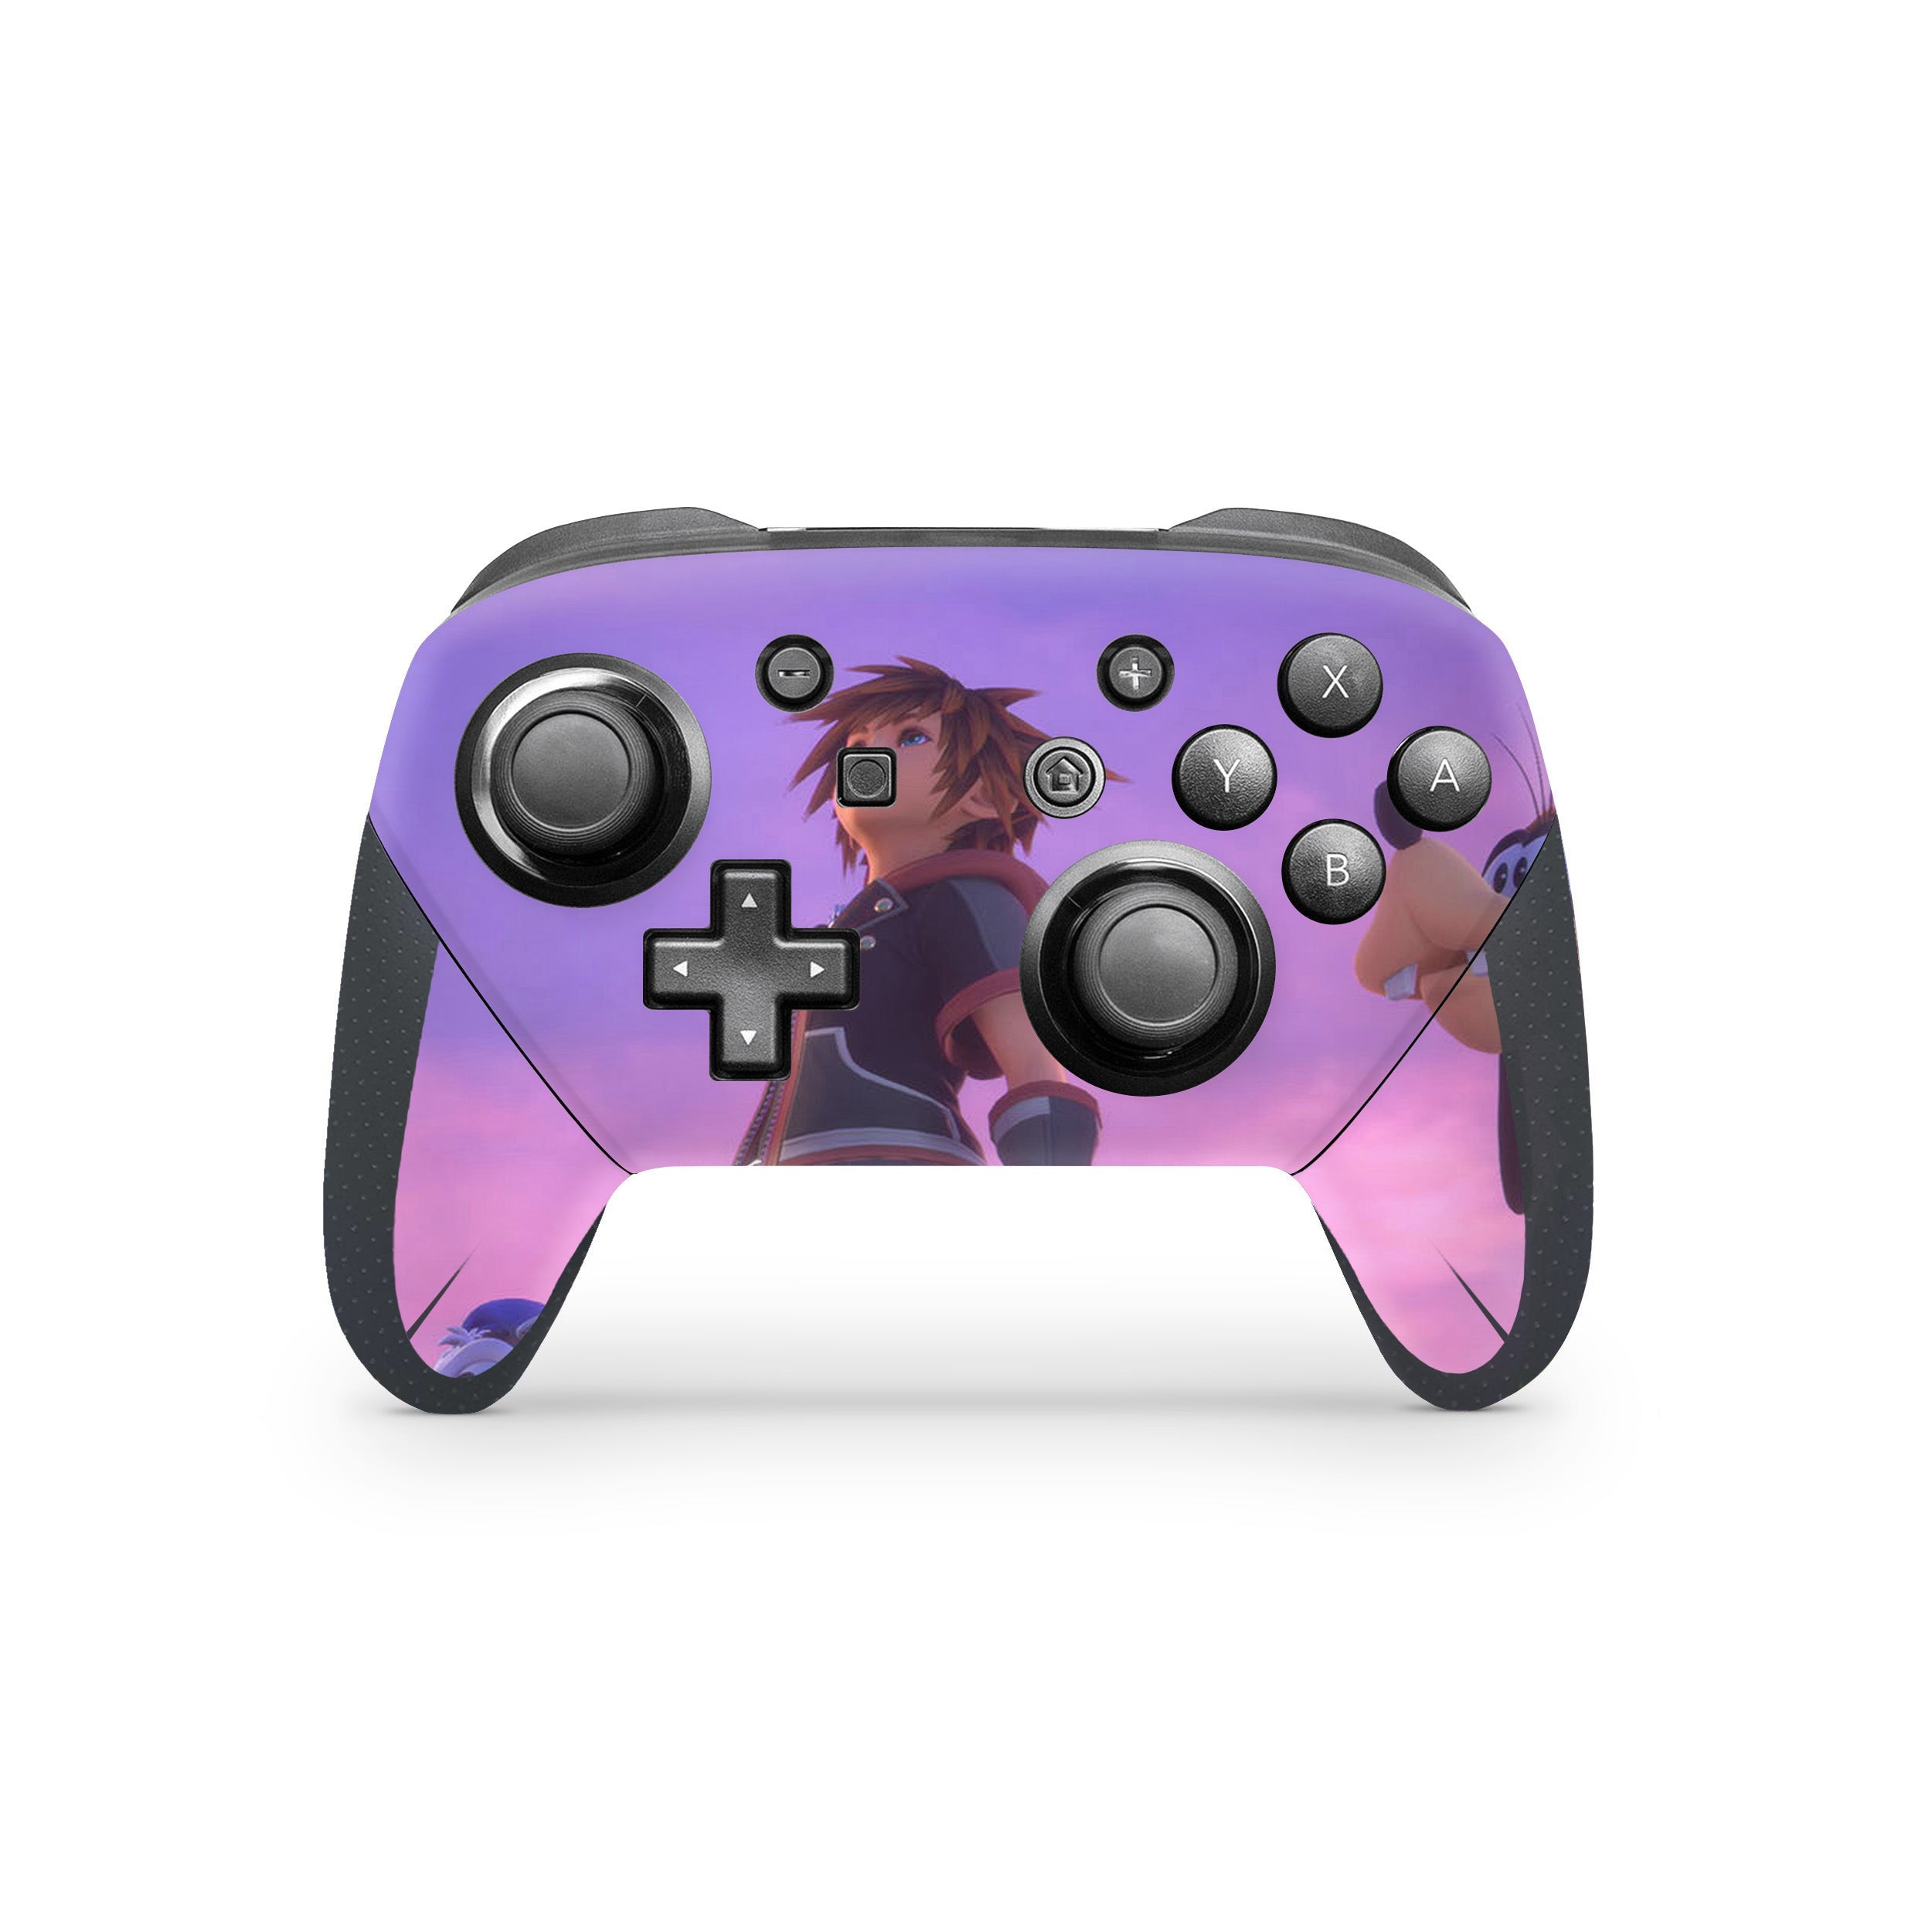 A video game skin featuring a Kingdom Hearts design for the Switch Pro Controller.